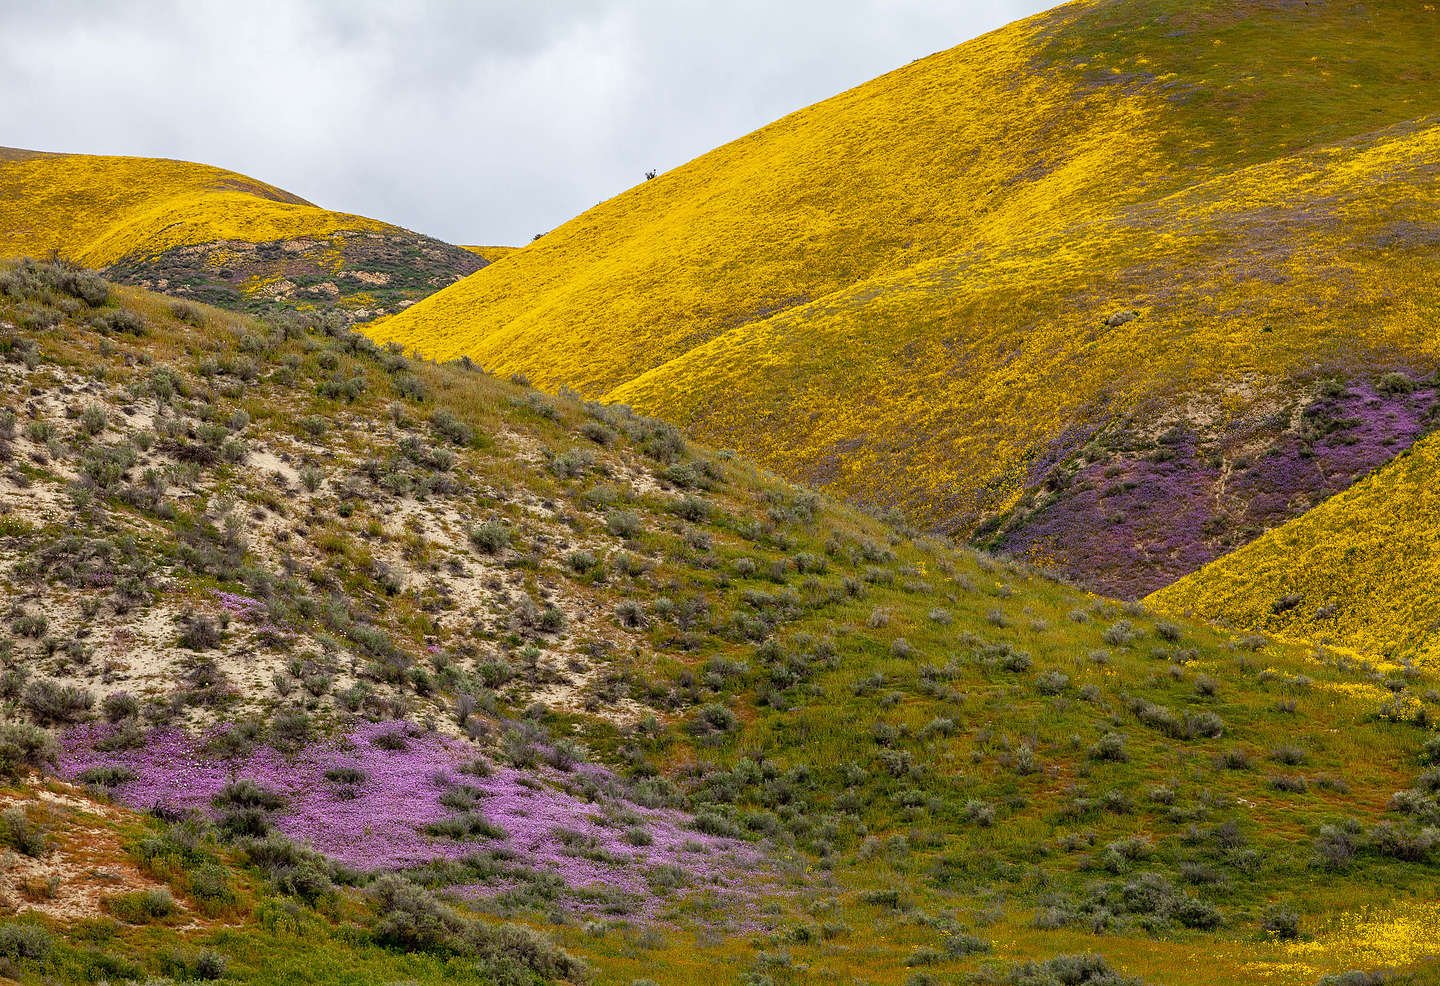 The colored hills of Carrizo Plains